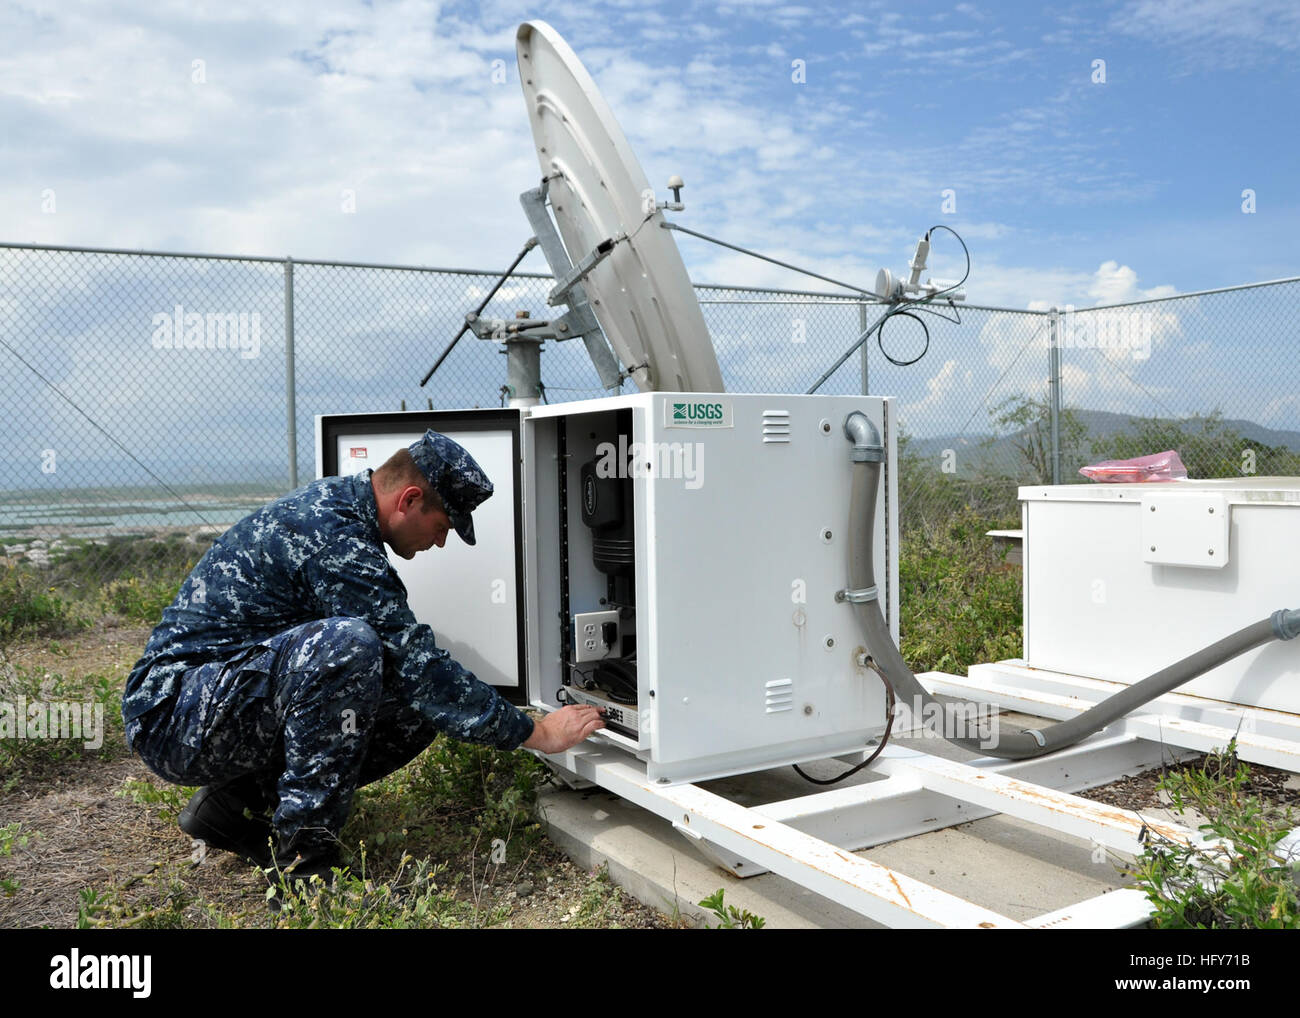 100518-N-8241M-021 GUANTANAMO BAY, Cuba (May 18, 2010) Electronics Technician 1st Class Michael Schiltz, assigned to Naval Station Guantanamo Bay (GTMO), Cuba, adjusts a modem on a U.S. Geological Survey (USGS) remote seismic station. GTMO has one of nine remote seismic stations in the Caribbean that are used to monitor seismic activity. Schiltz works with the USGS to insure the equipment is maintained and in good repair. (U.S. Navy photo by Chief Mass Communication Specialist Bill Mesta/Released) US Navy 100518-N-8241M-021 Electronics Technician 1st Class Michael Schiltz, assigned to Naval St Stock Photo